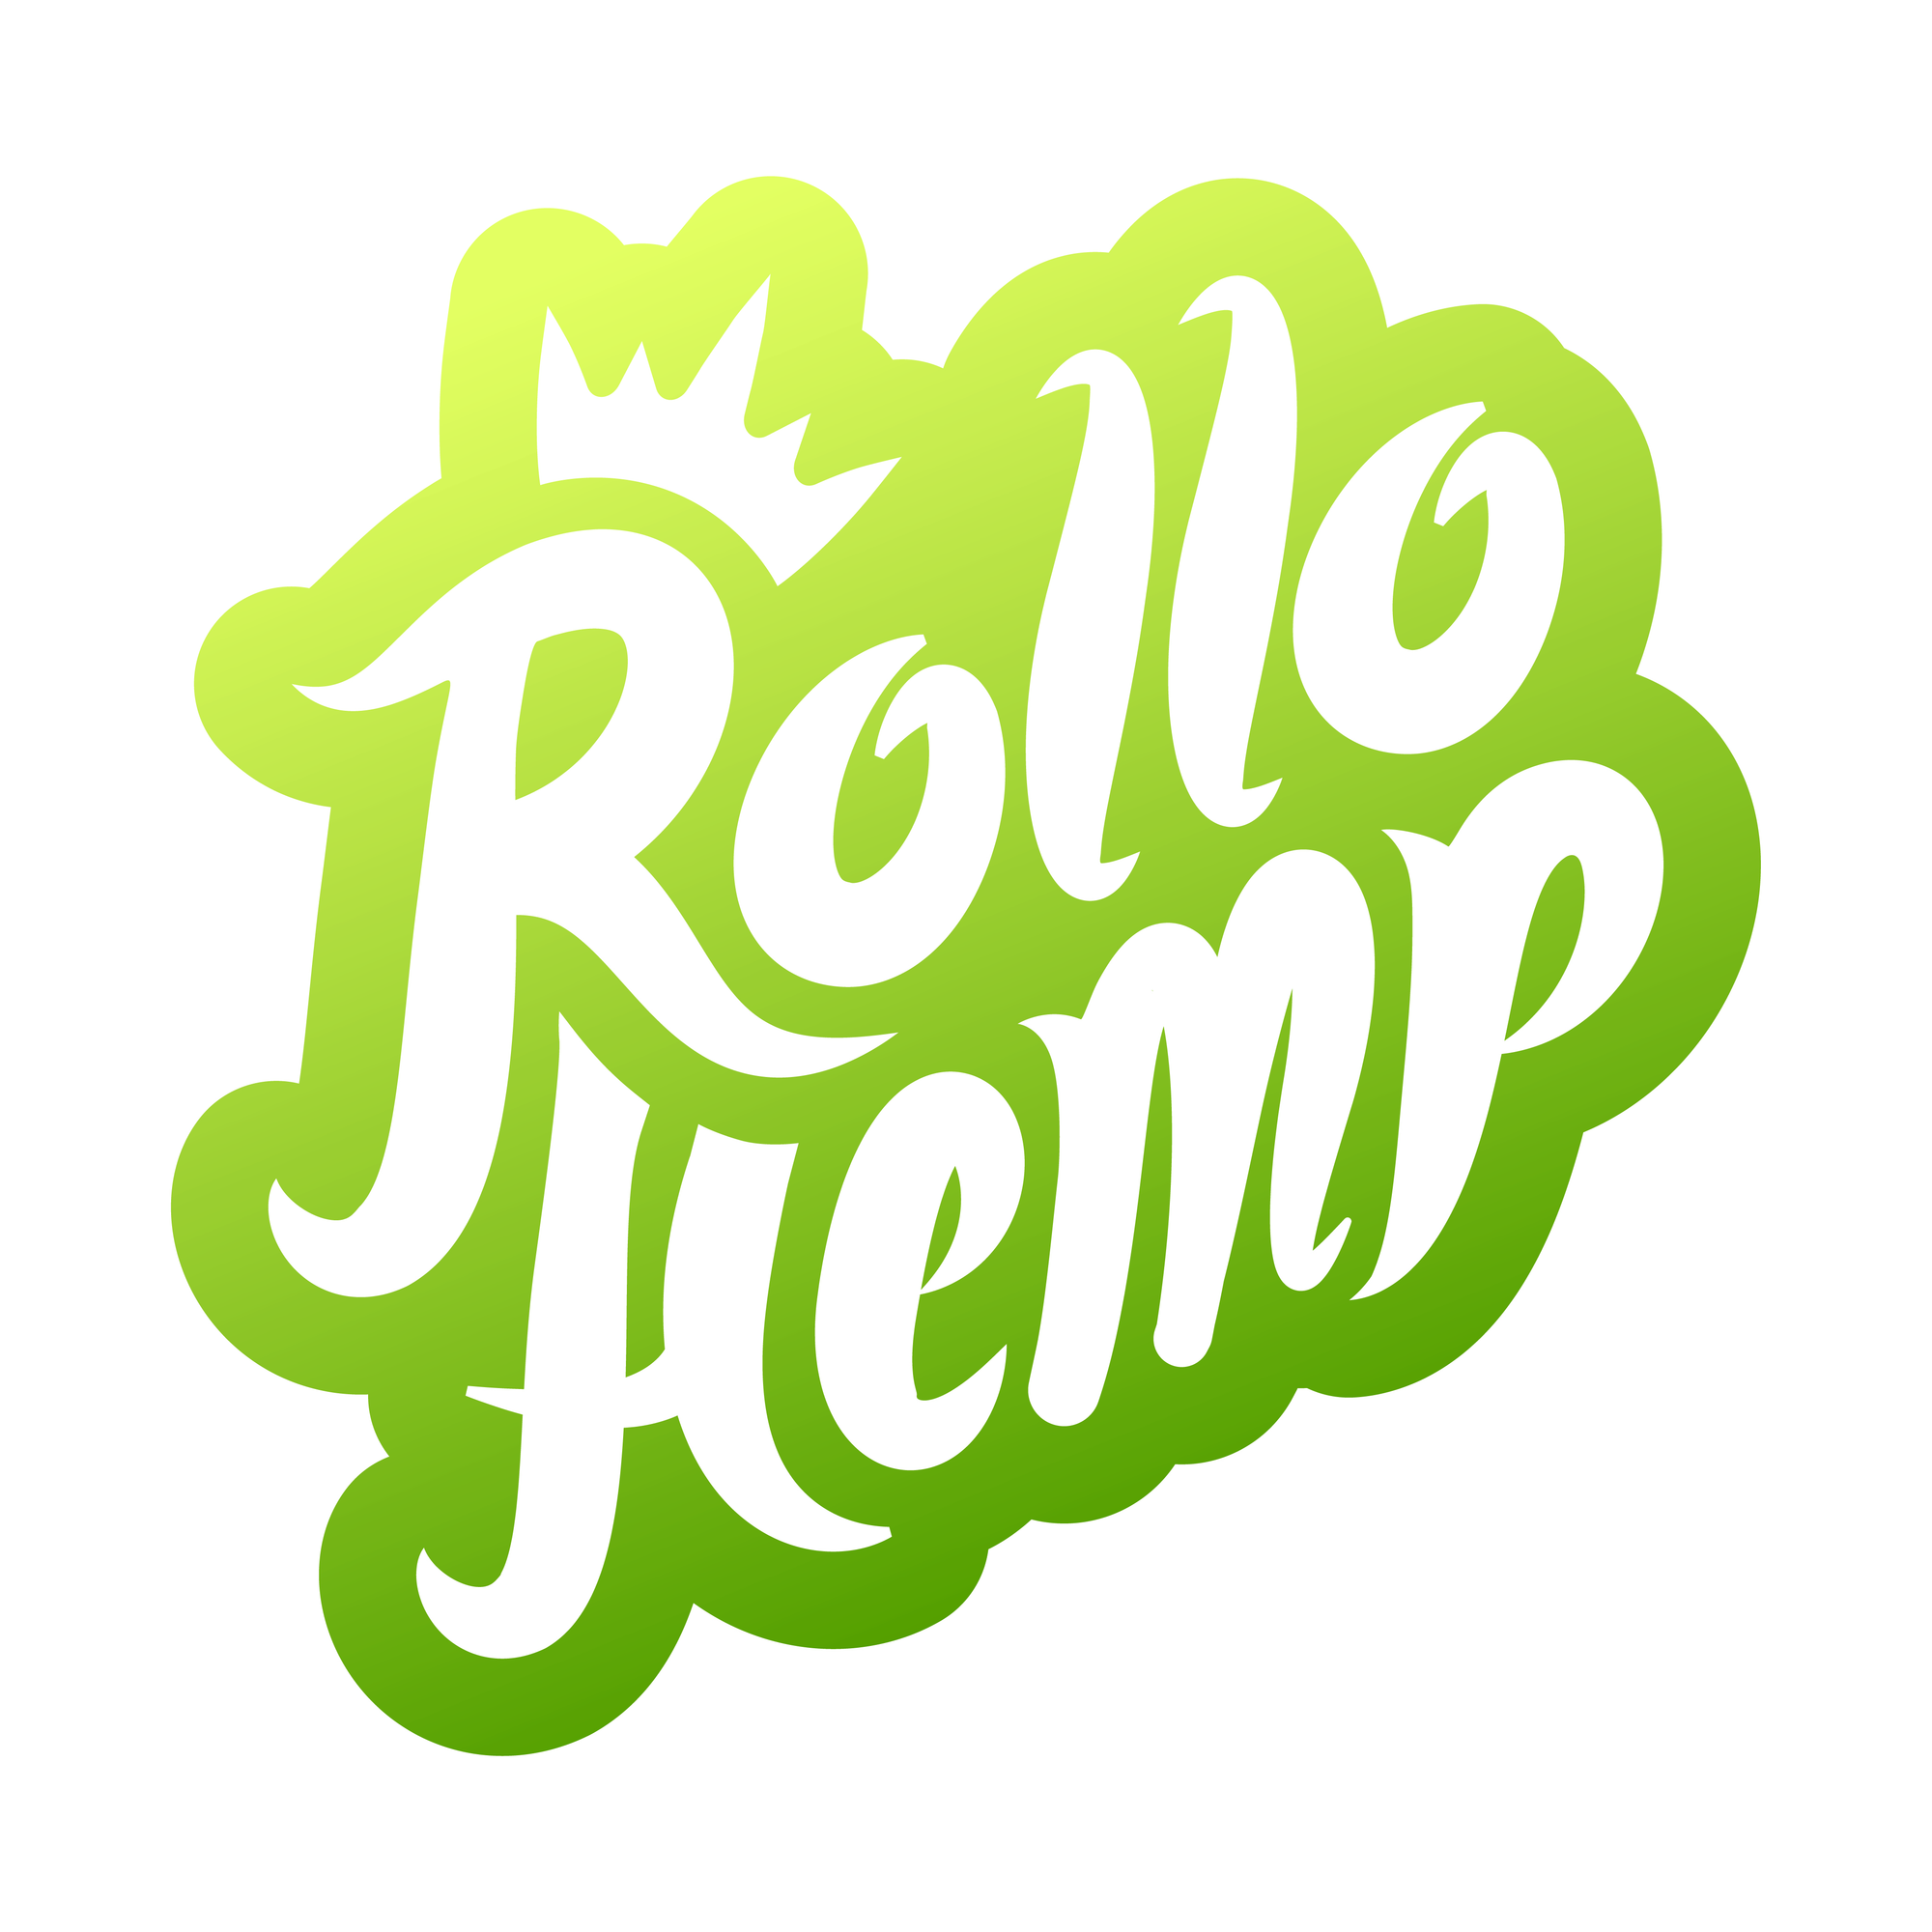 Rollo Hemp is one of the finest Delta 8 cigarette Infused CBD hemp companies that is powered by CBDism, our parent company. Our mission is to provide affordable hemp-derived options for consumers across the world. We strive to offer hemp products that are